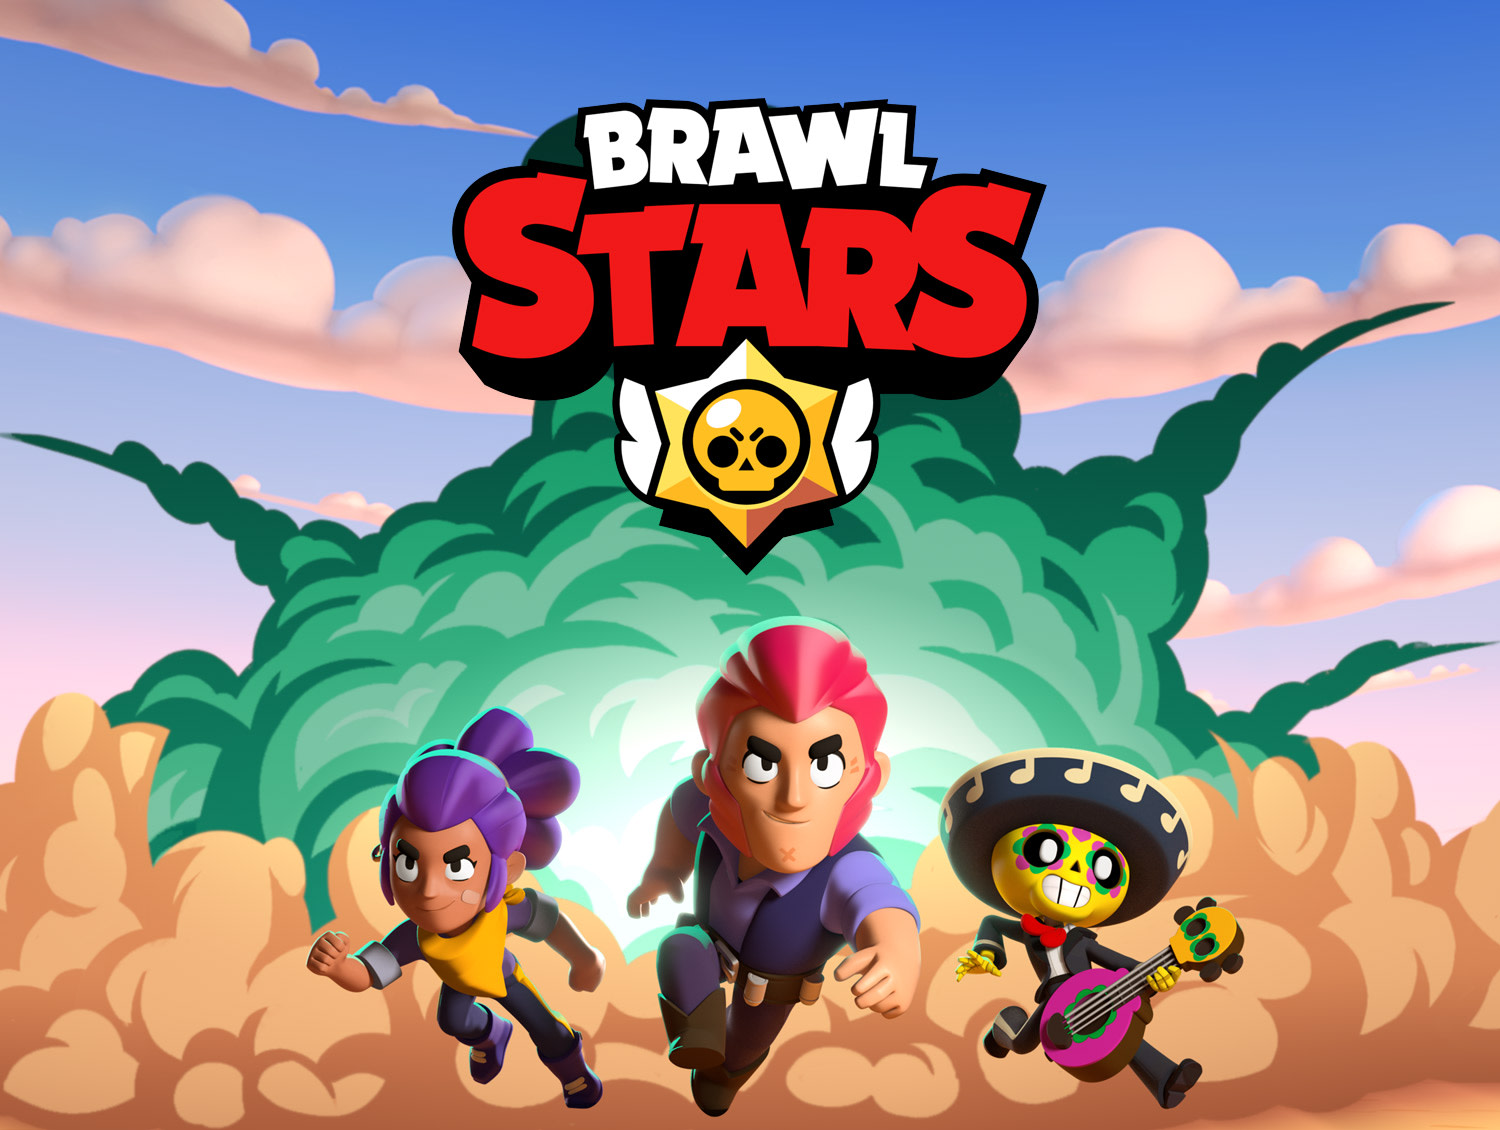 All Brawl Stars Season 20 Events: Dates and Schedule